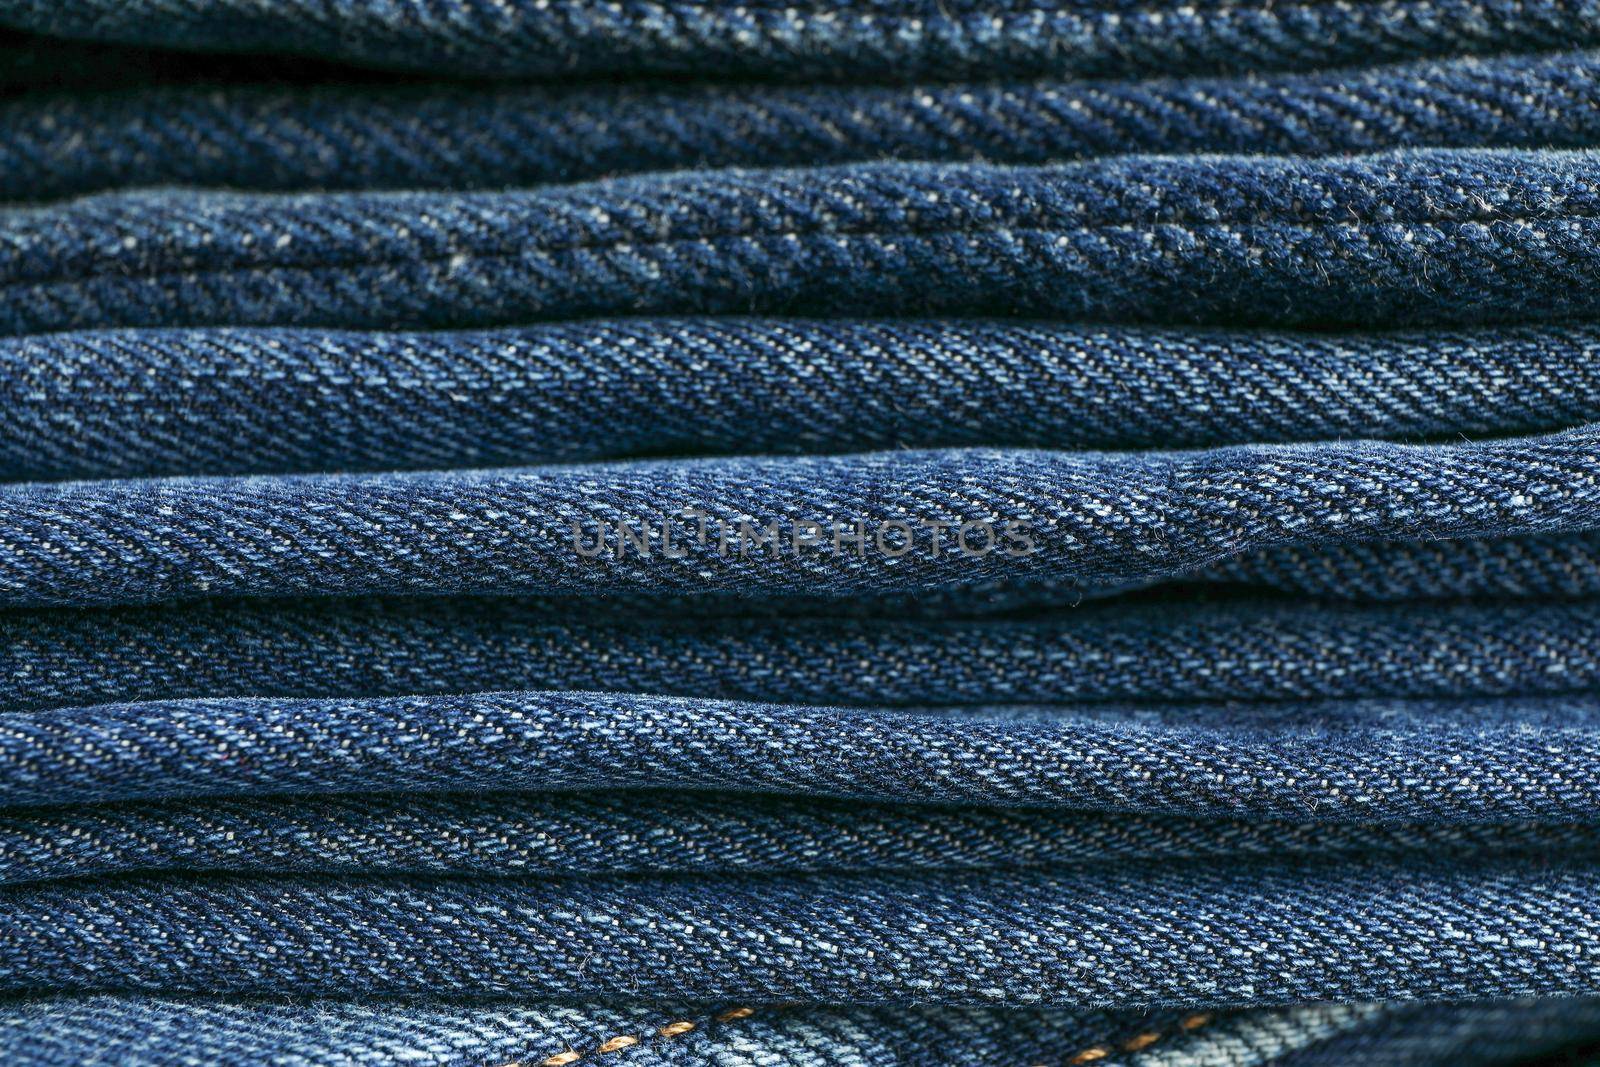 Stack of blue jeans as background, space for text